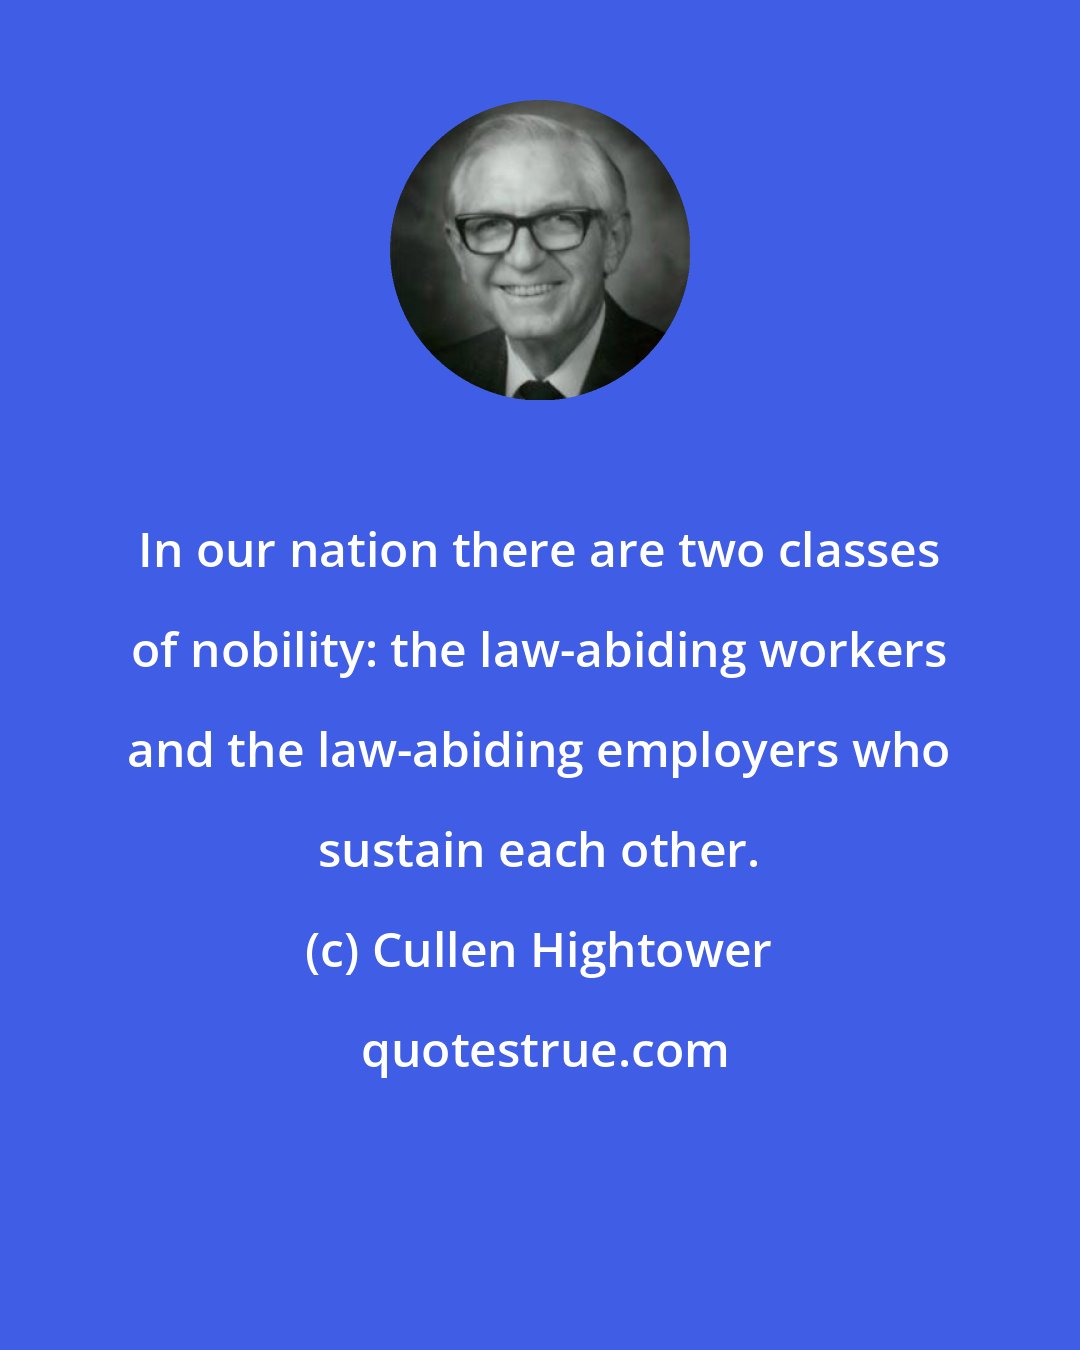 Cullen Hightower: In our nation there are two classes of nobility: the law-abiding workers and the law-abiding employers who sustain each other.